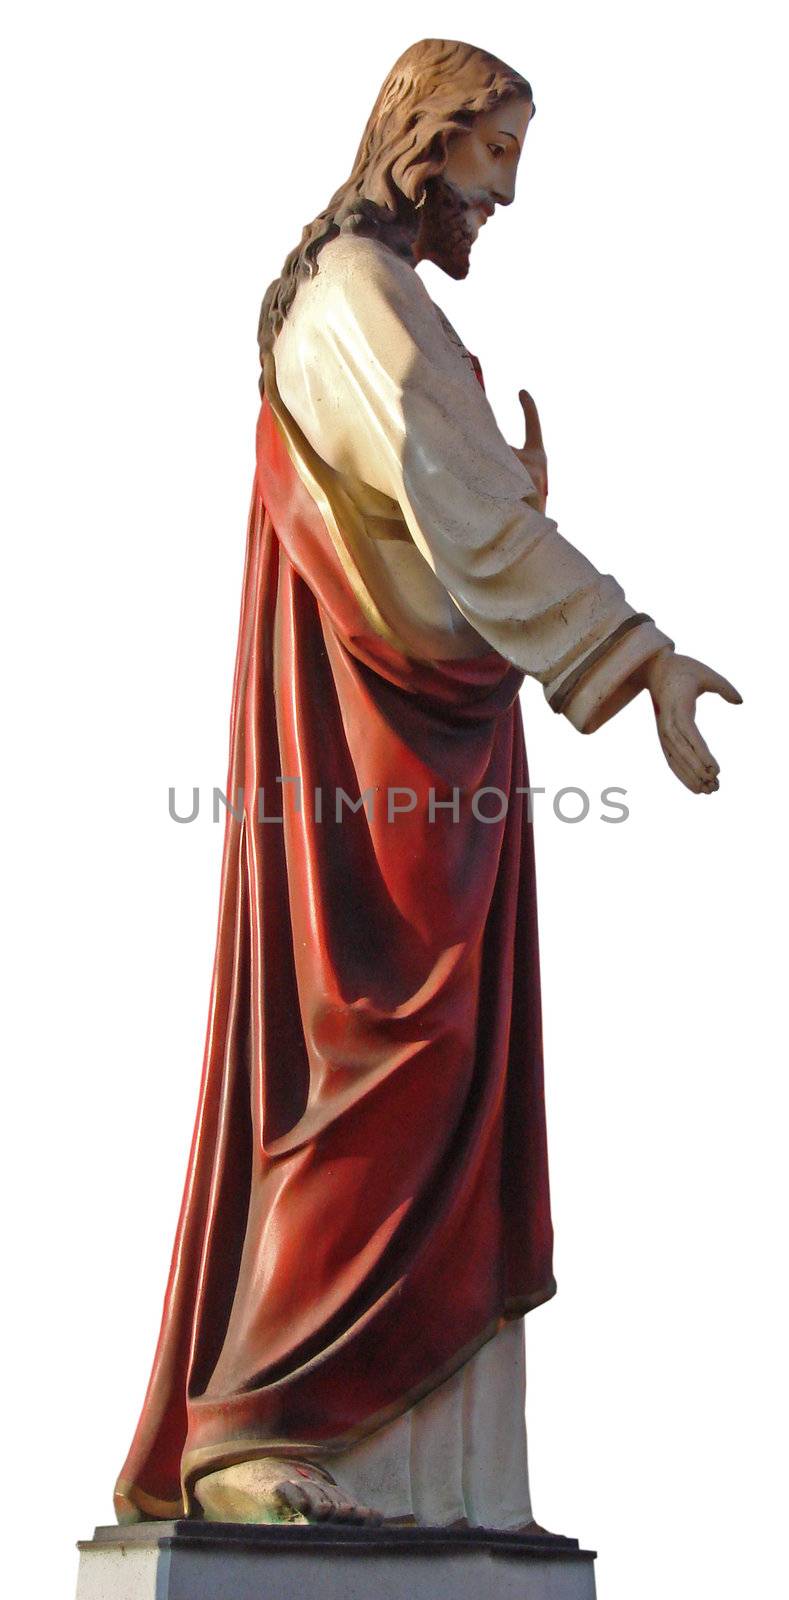 Decorated colrized Figure of Jesus Christ by fotosergio